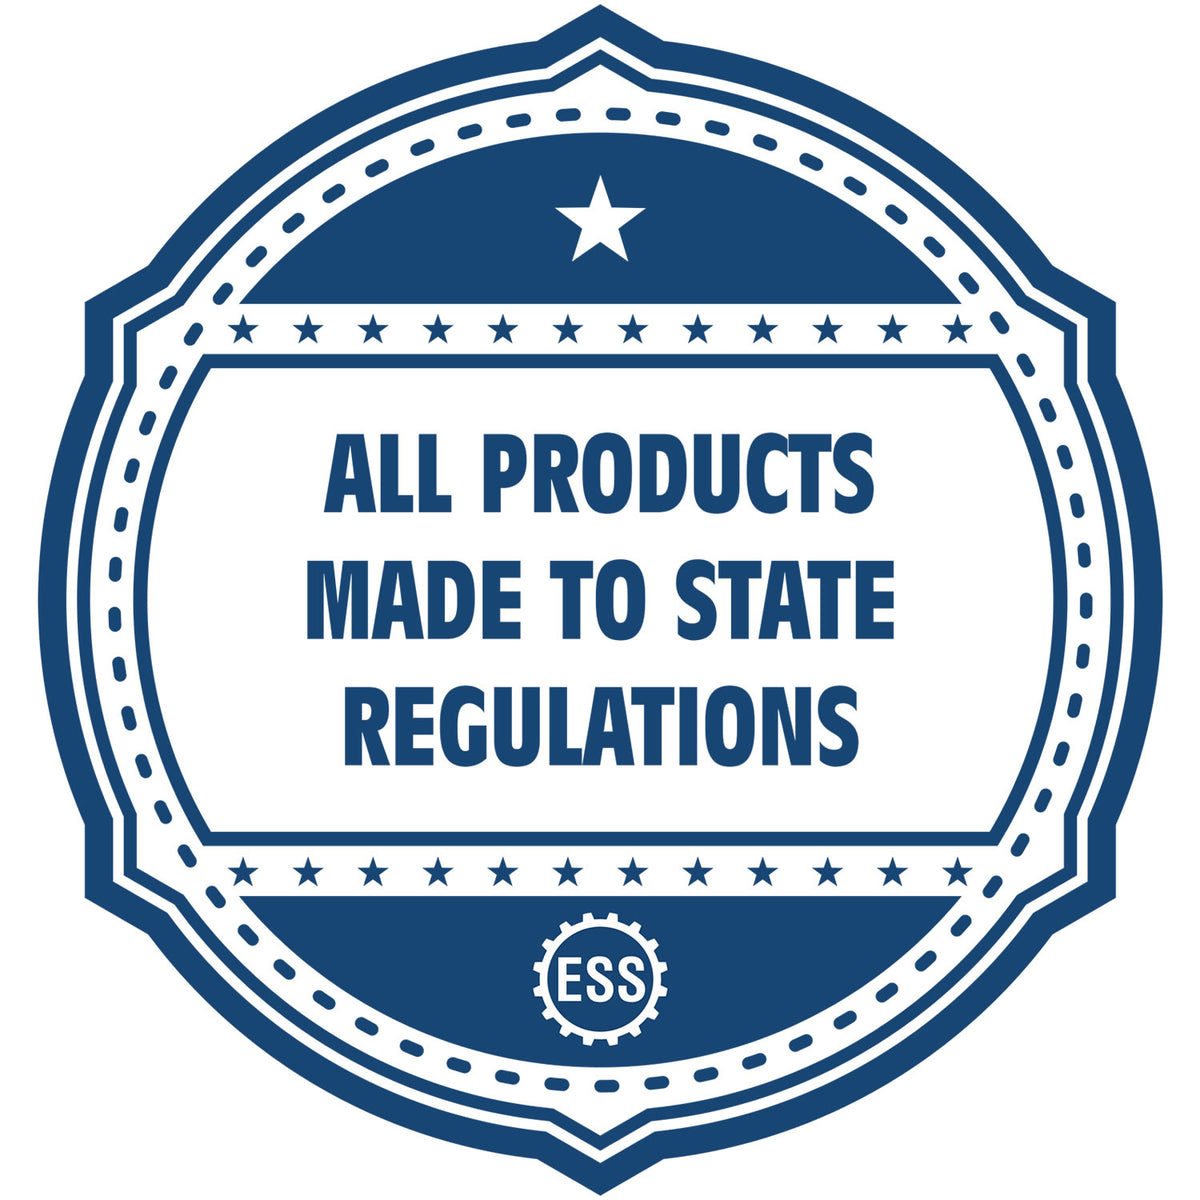 An icon or badge element for the MaxLight Premium Pre-Inked Illinois Rectangular Notarial Stamp showing that this product is made in compliance with state regulations.